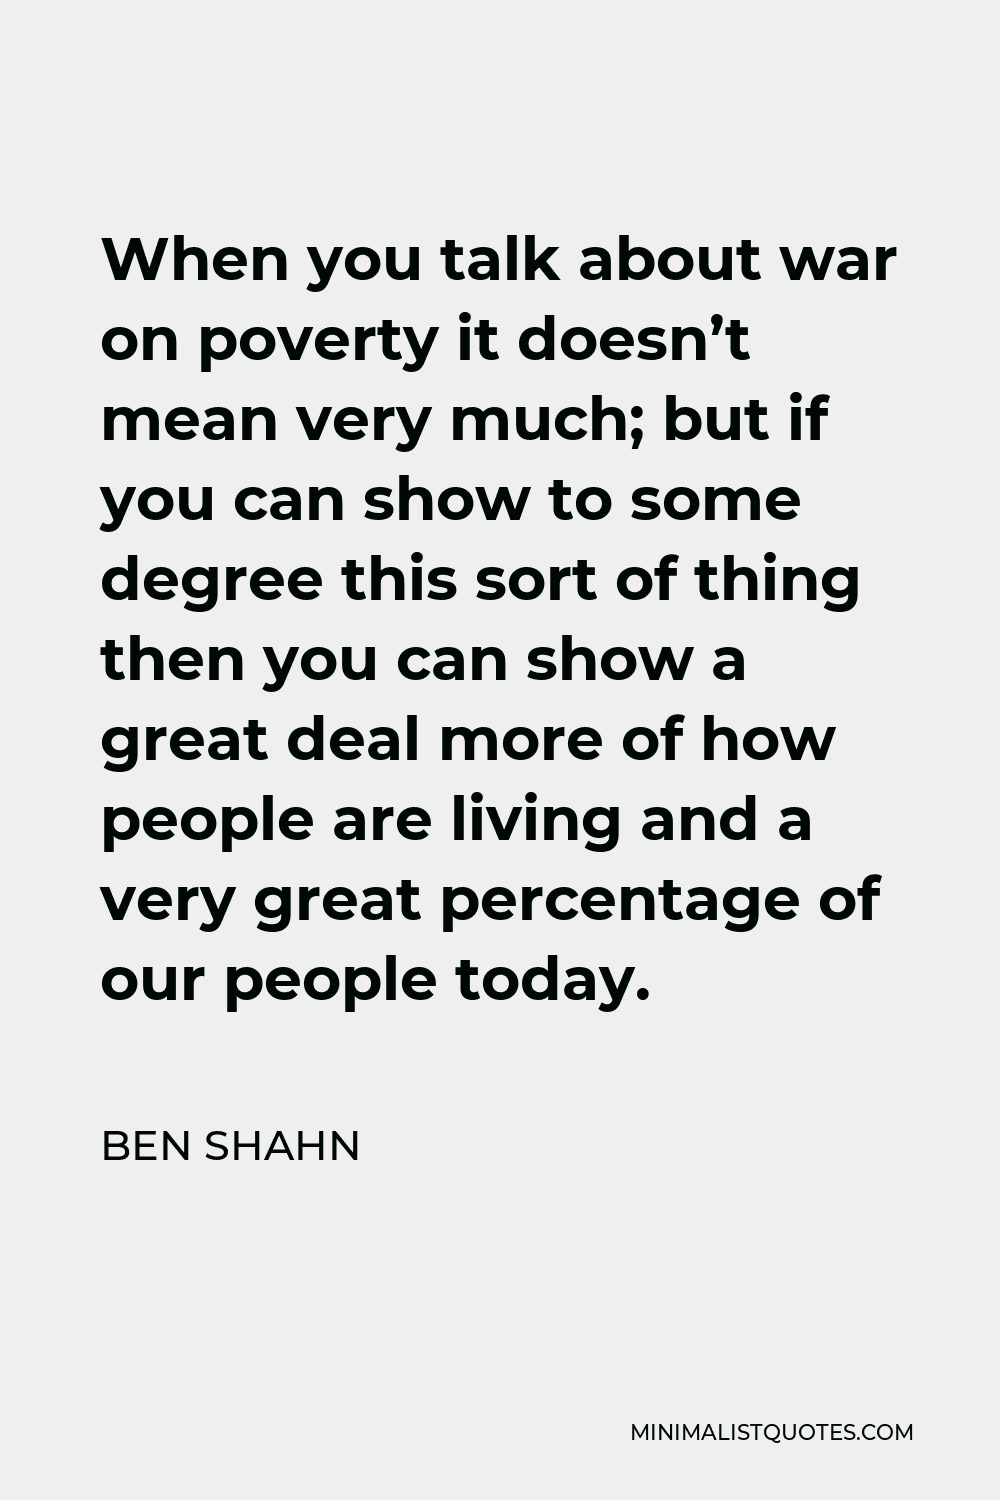 Ben Shahn Quote - When you talk about war on poverty it doesn’t mean very much; but if you can show to some degree this sort of thing then you can show a great deal more of how people are living and a very great percentage of our people today.